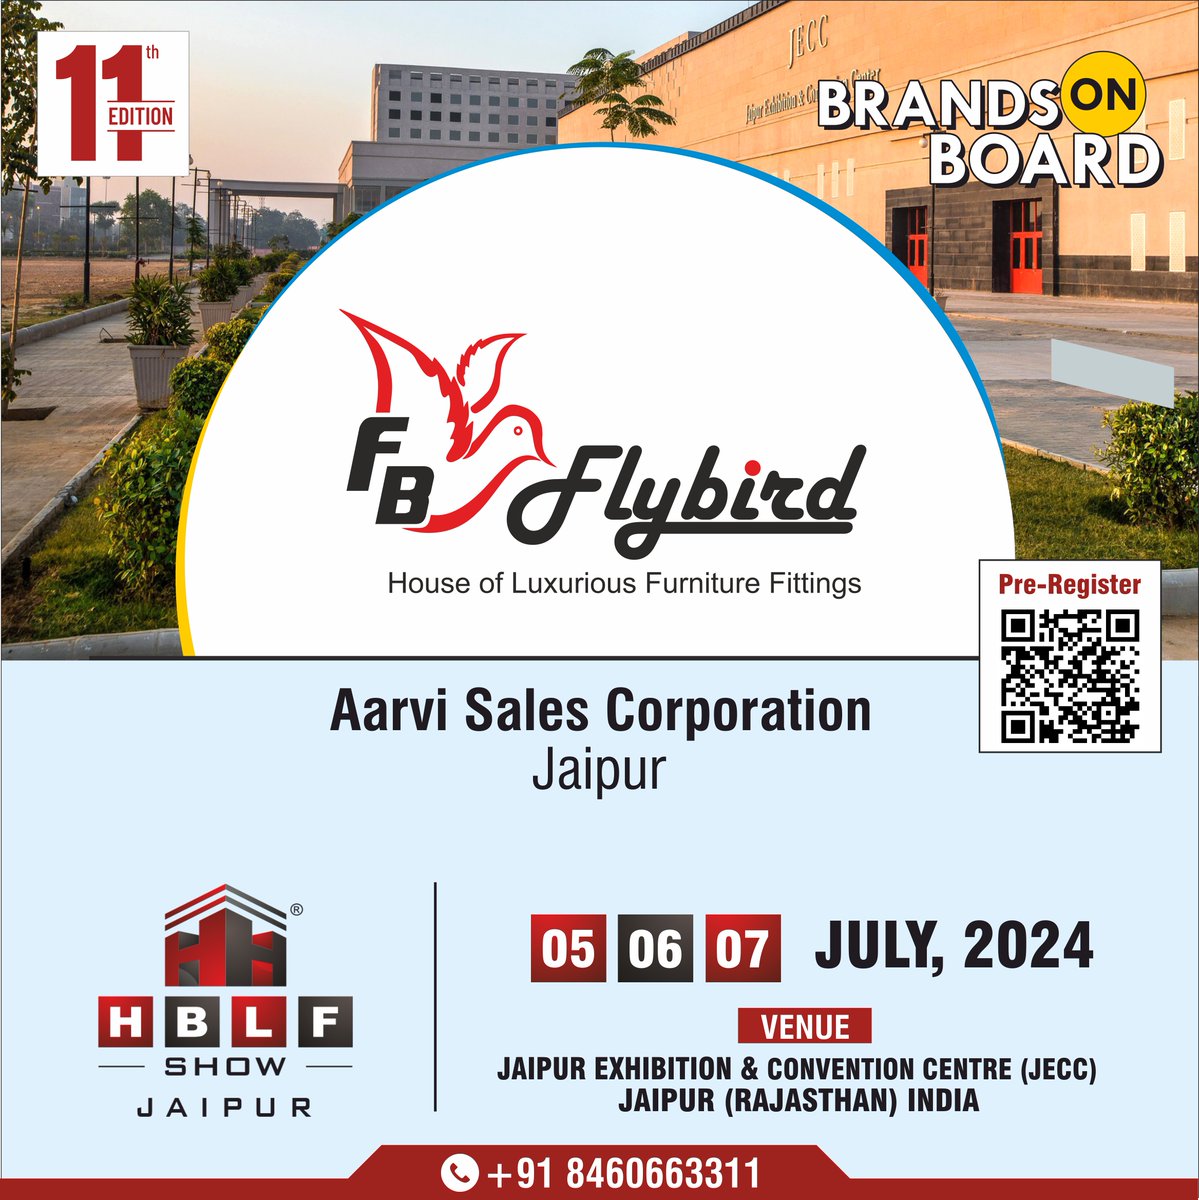 Flybird: Join us at HBLF Show Jaipur, 05-06-07 July 2024 at JECC Rajasthan - See You There!
#Flybird #Distributor #Jaipur #AarviSalesCorporation #FurnitureFittings #FurnitureHardware #FlybirdHardware #luxuryhardware #HBLFShow #JECC #HBLFShow2024 #Hardware #Building #Lifestyle